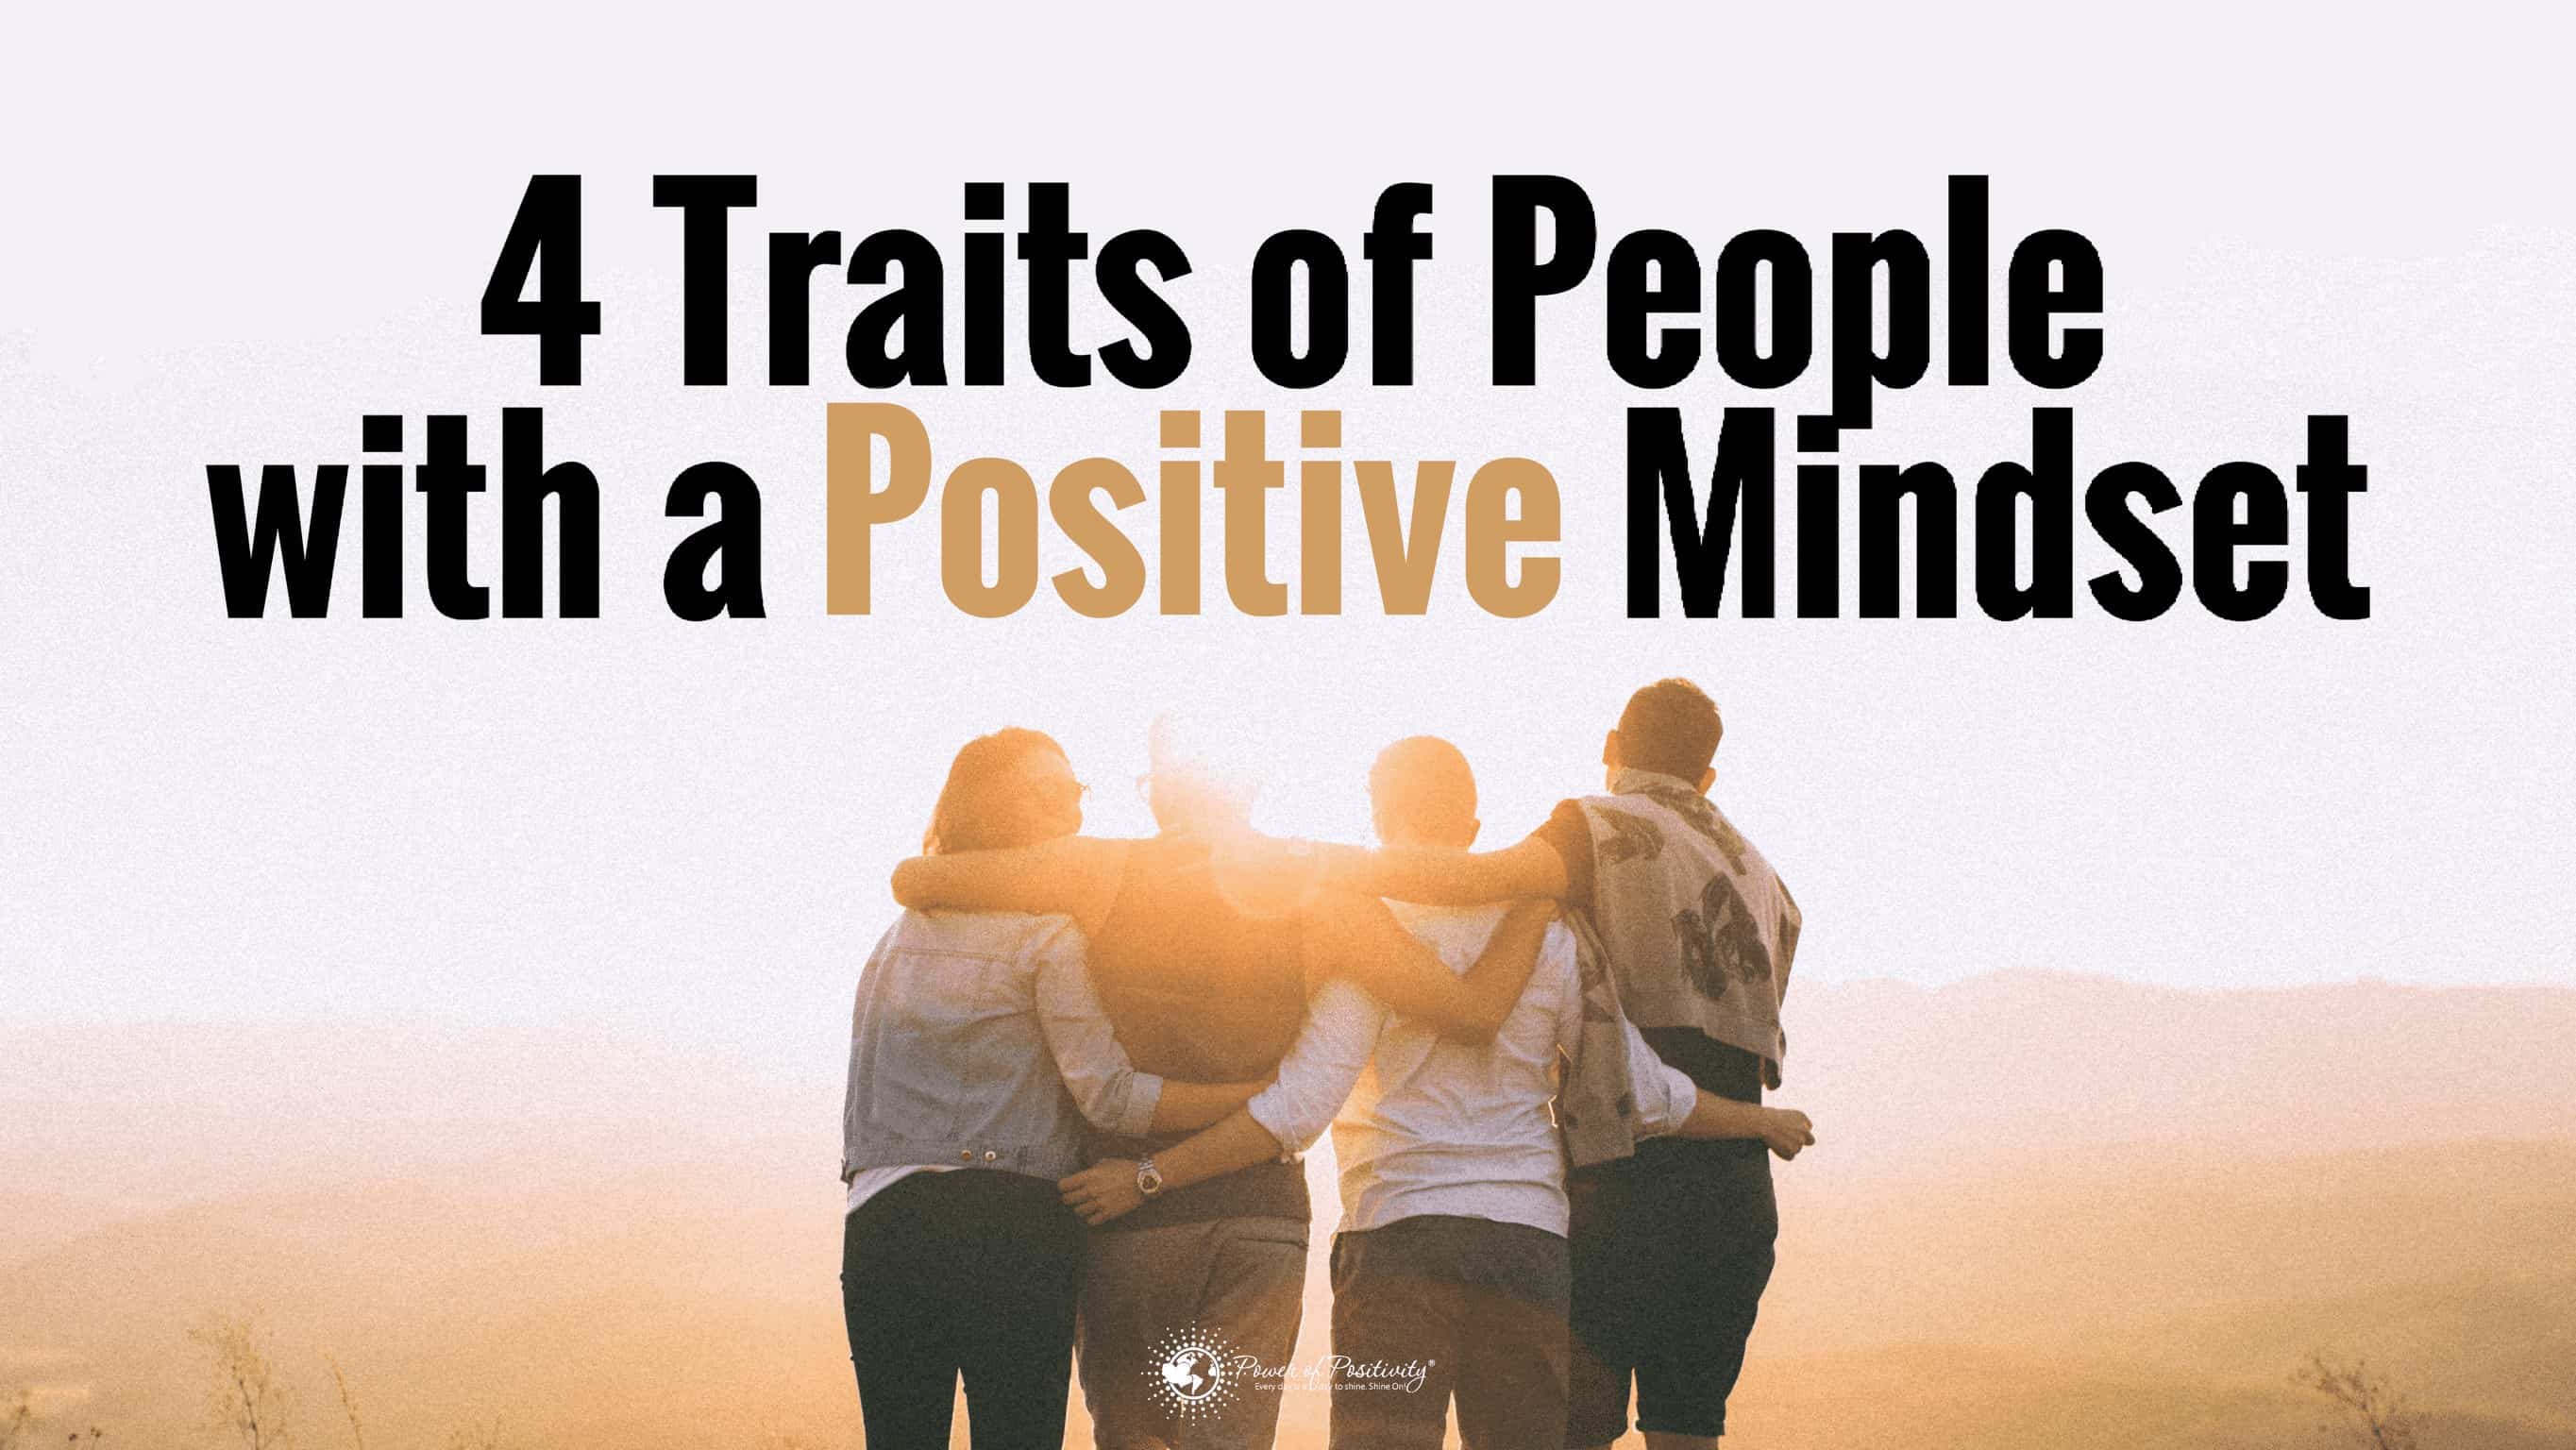 4 Traits of People with a Positive Mindset